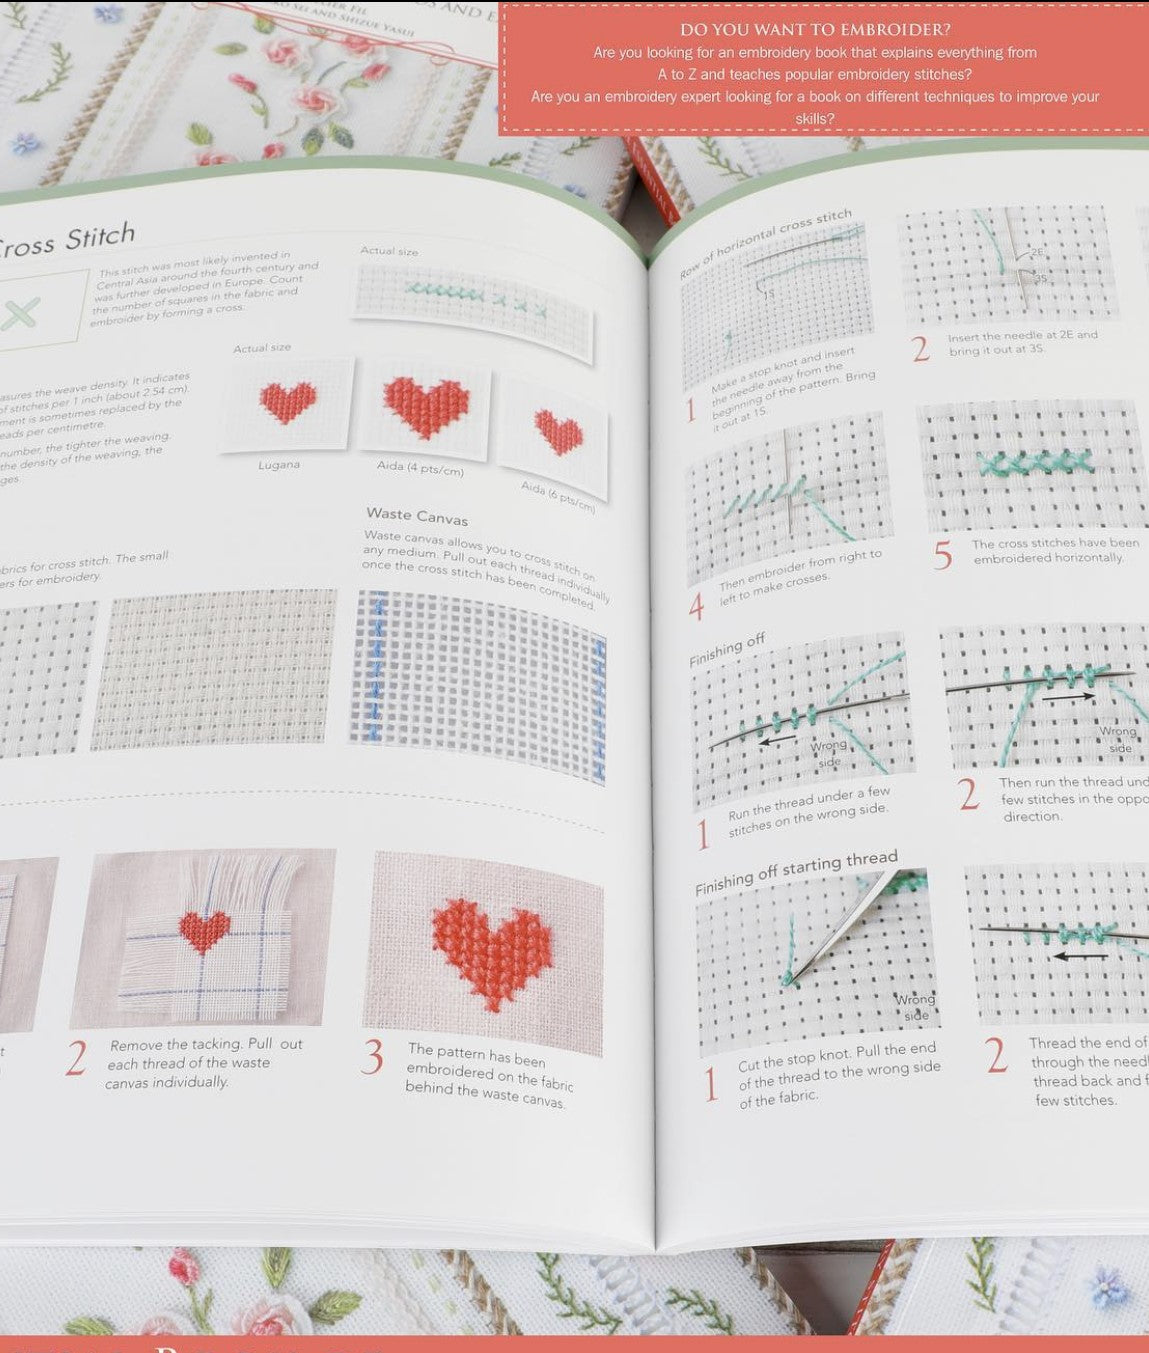 The Essential Book of Embroidery Stitch by Atelier Fil: Hiroko Sei